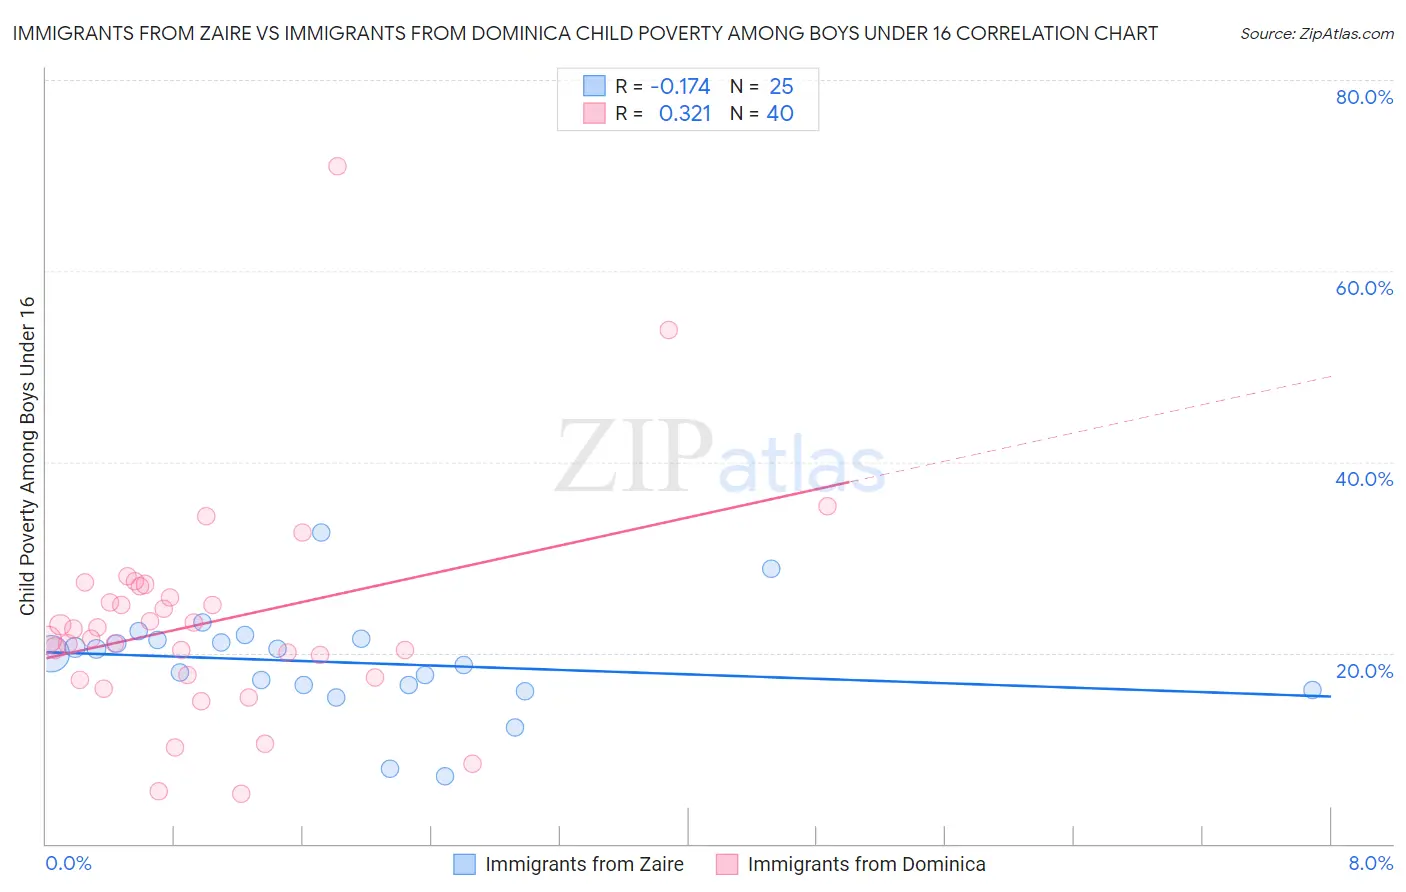 Immigrants from Zaire vs Immigrants from Dominica Child Poverty Among Boys Under 16